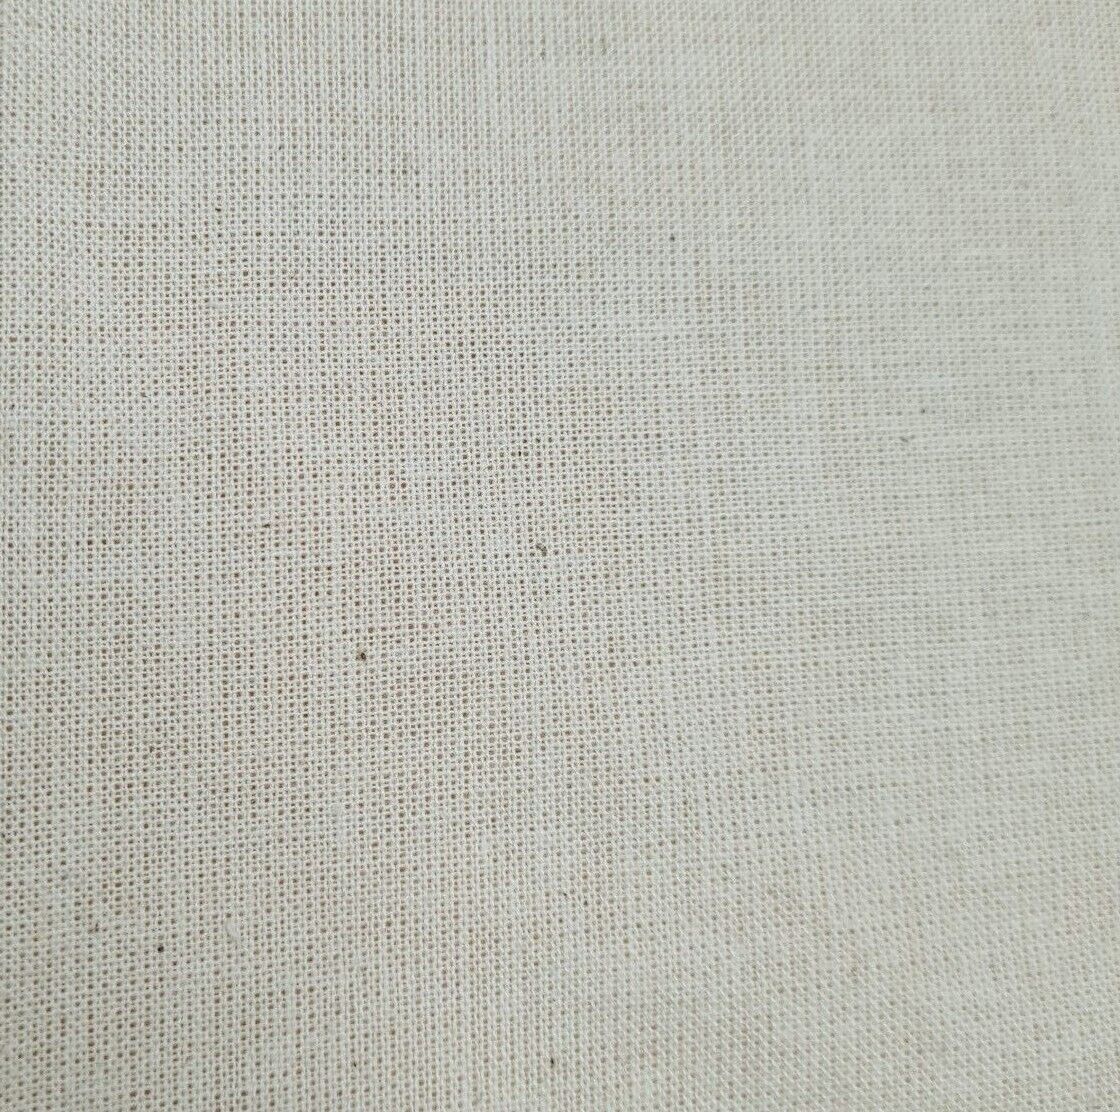 Cotton Calico Fabric Cream Colour Medium Weight 55'' Wide Sold By The Metre